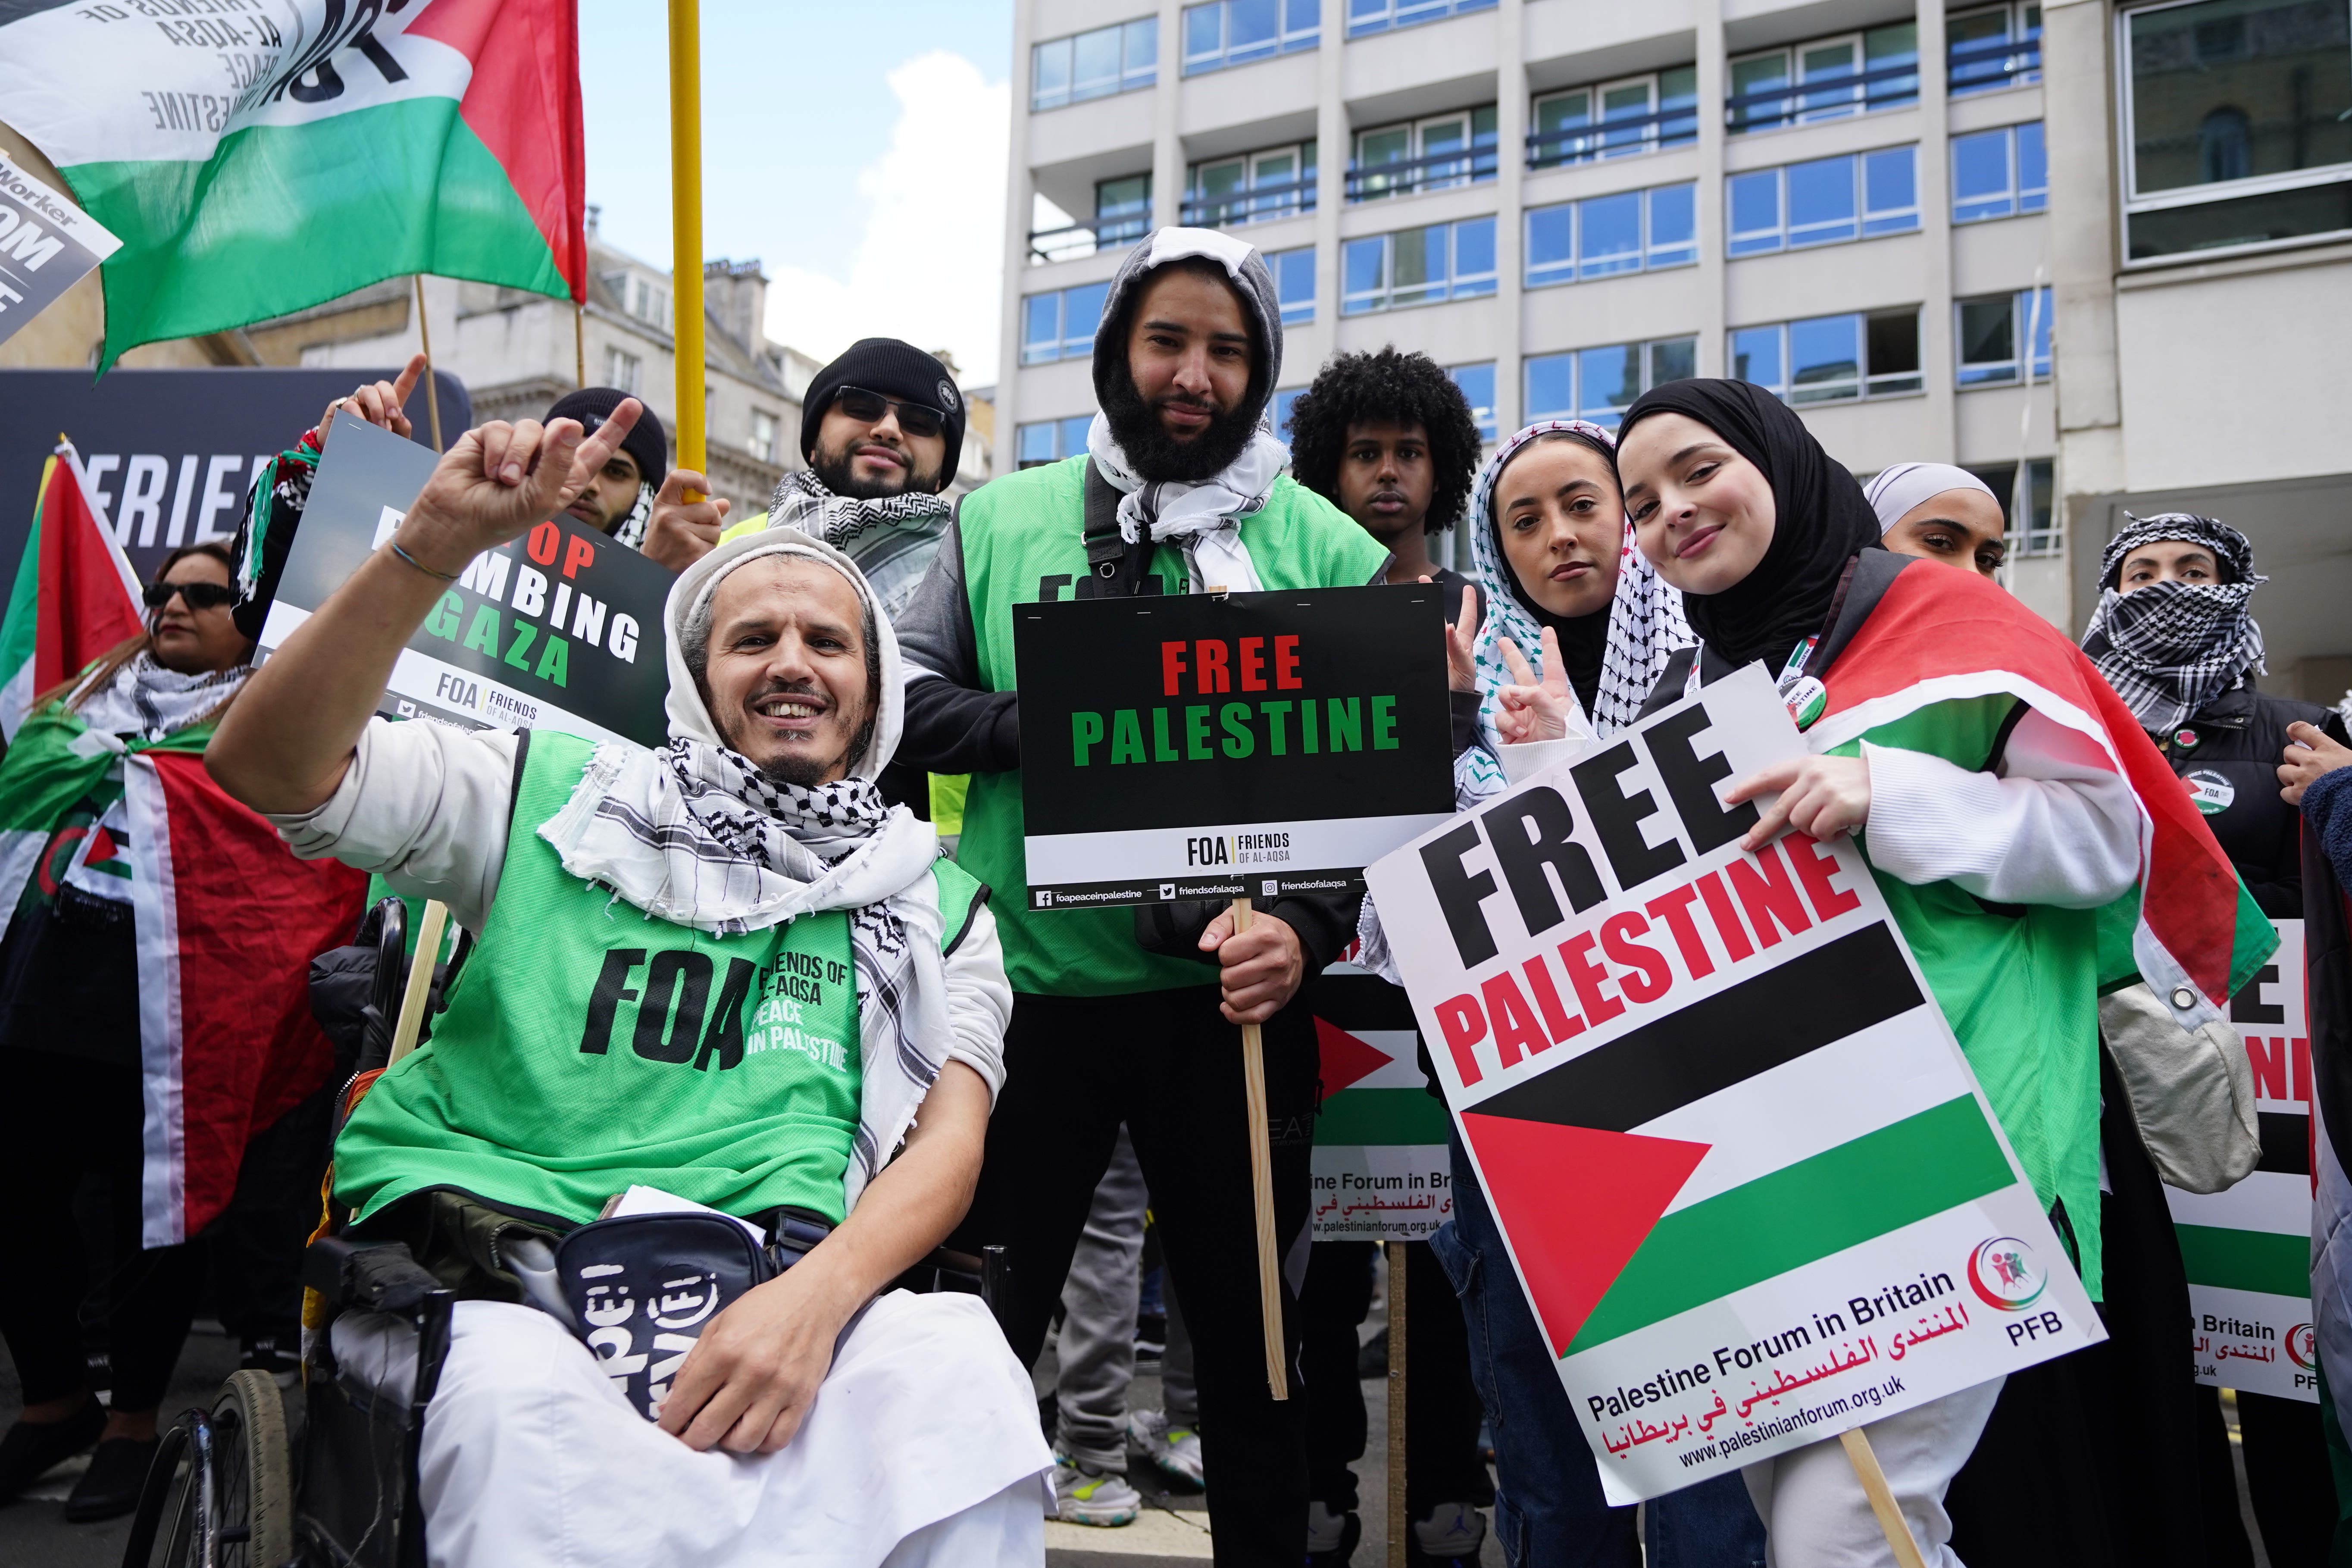 Protesters attend a march for Palestine in London (James Manning/PA)